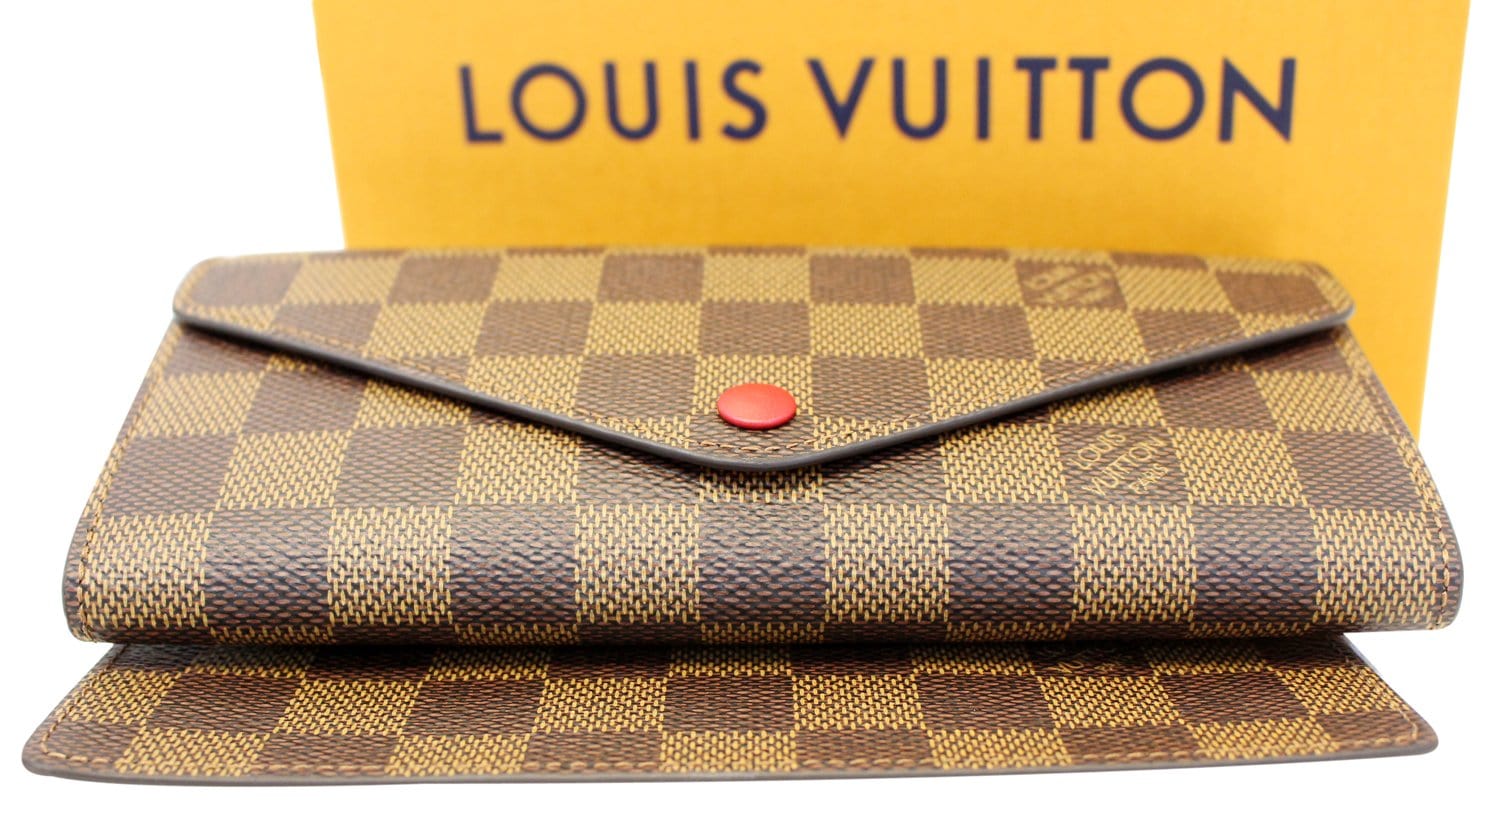 ✨LOUIS VUITTON✨ Josephine Wallet Selling $600 Discontinued in Damier Ebene  Comes with a removable coin purse Good condition Full set